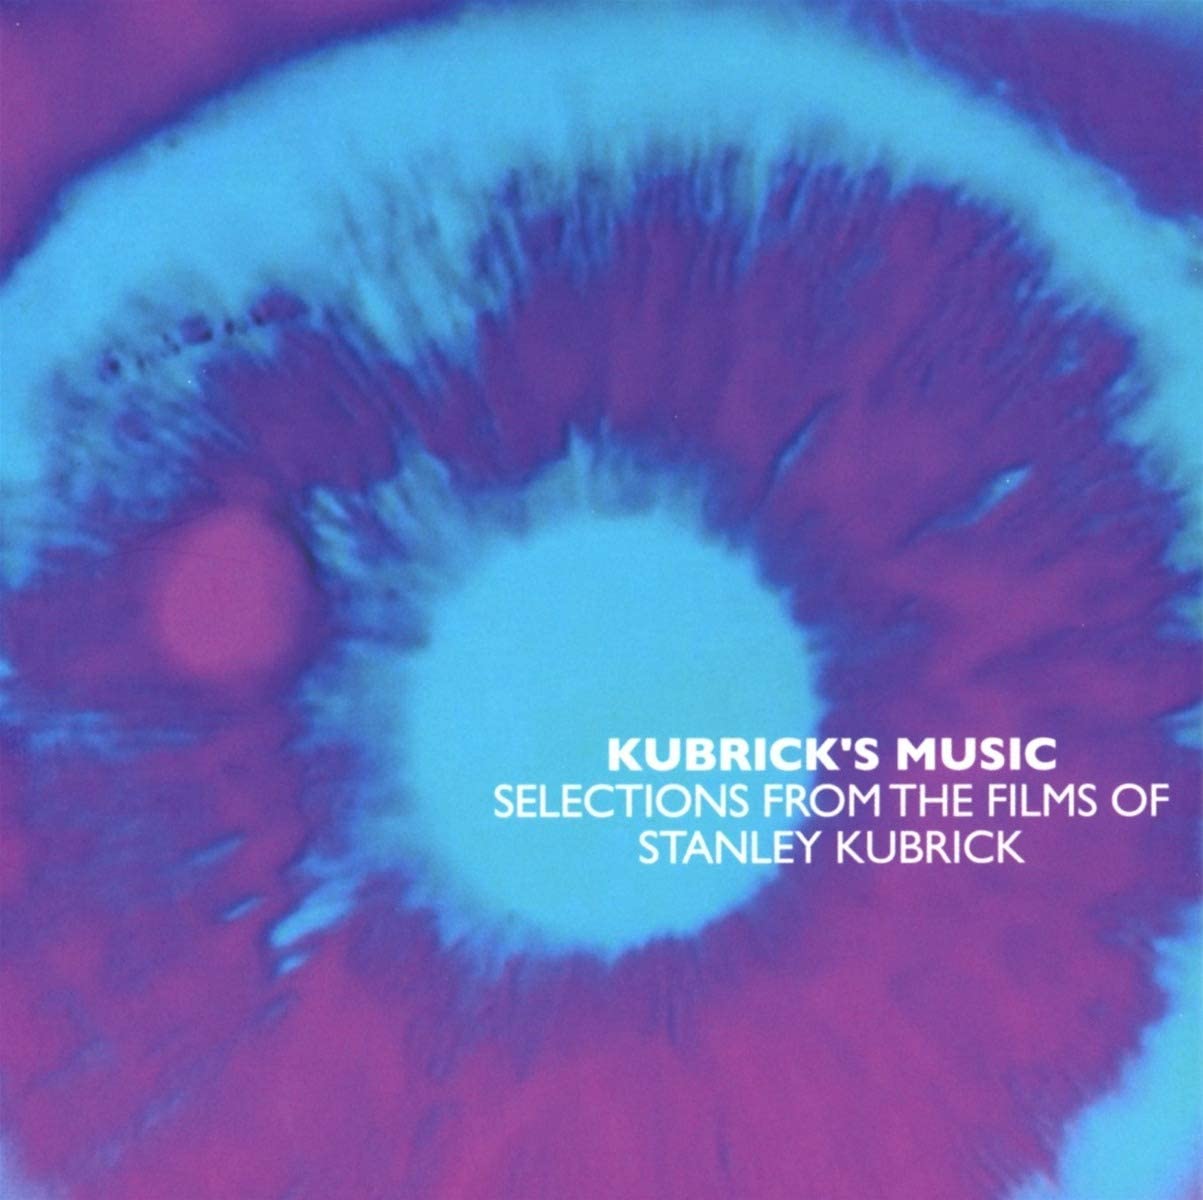 Kubrick #39 s Music (Selections From The Films Of Stanley Kubrick